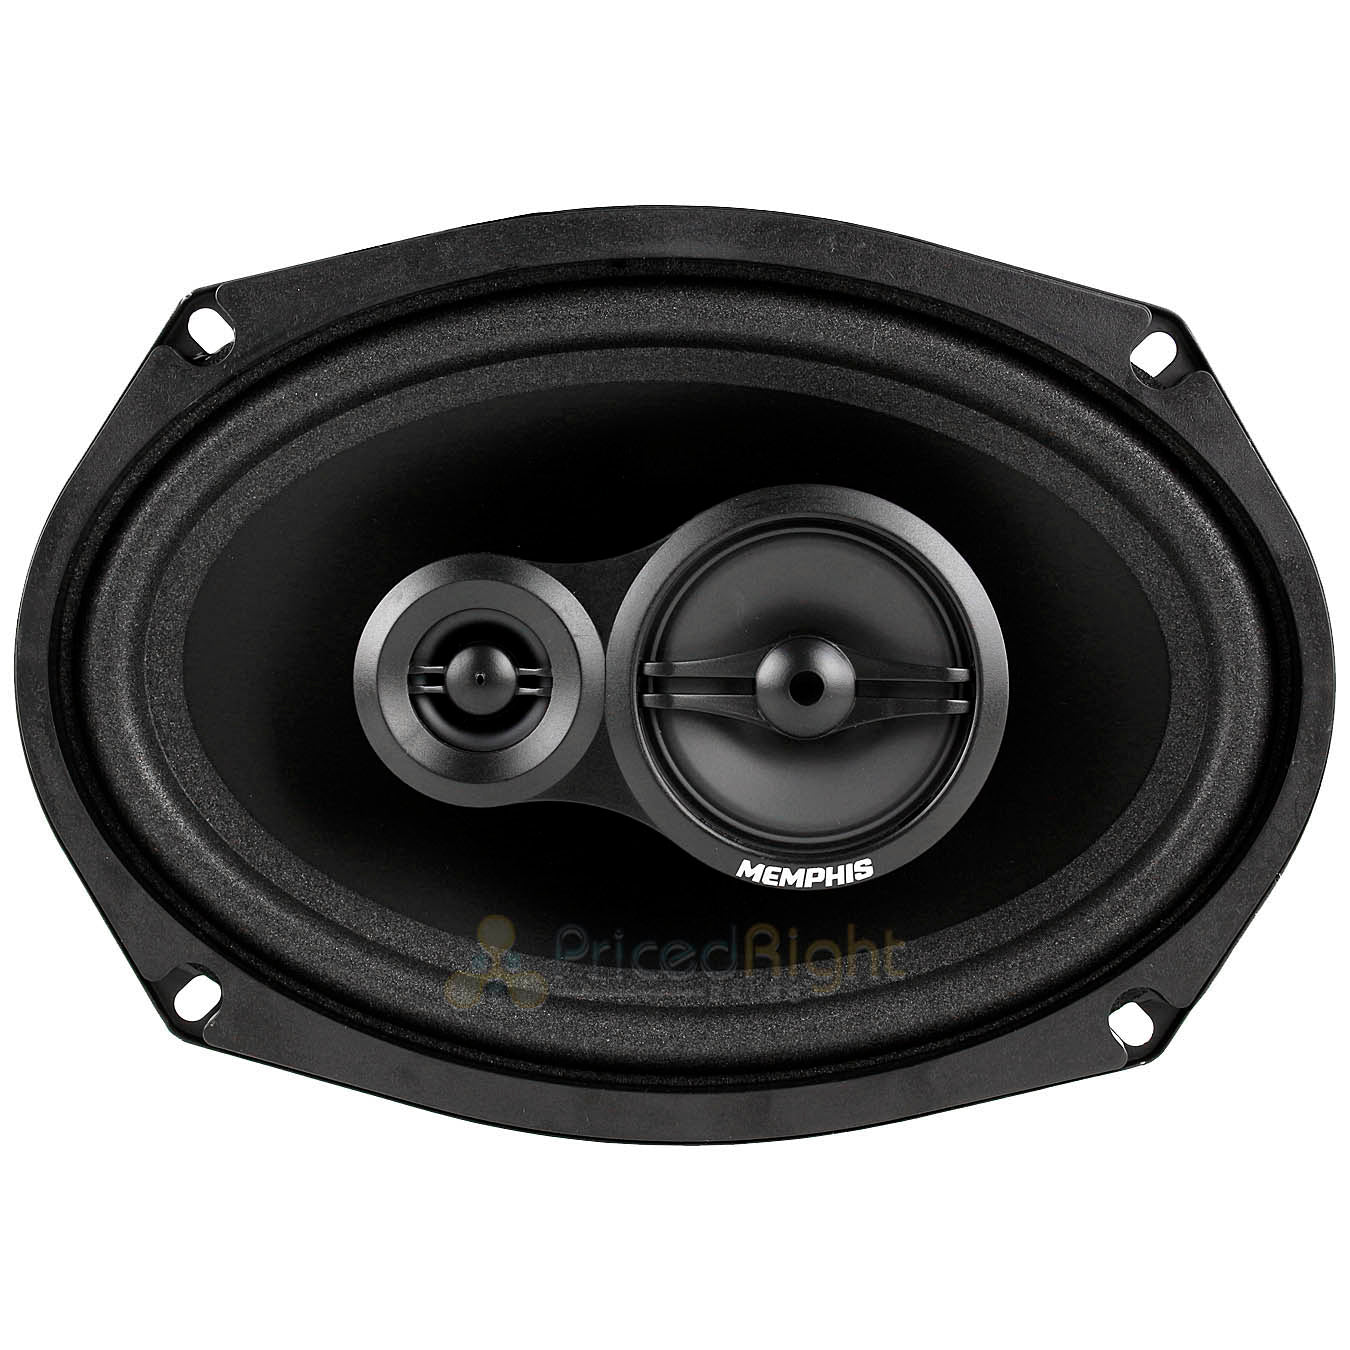 4 Pack Memphis 6x9" 3 Way Coaxial Speakers 100W Max Street Reference Series